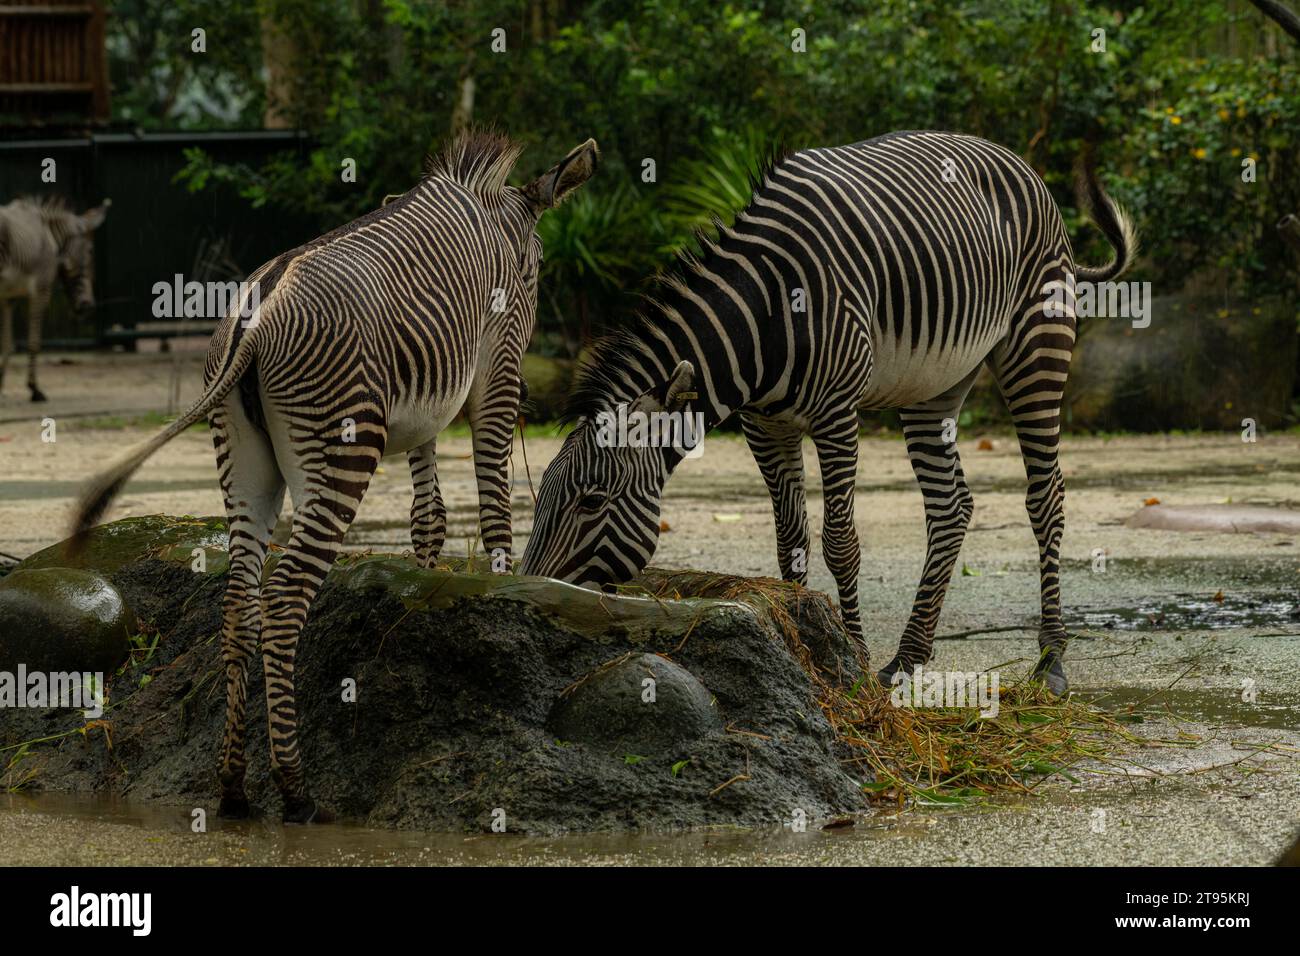 Beautiful zebra animals are eating grass, mother and child zebras are eating green lawn grass in the zoo, copy space for text Stock Photo